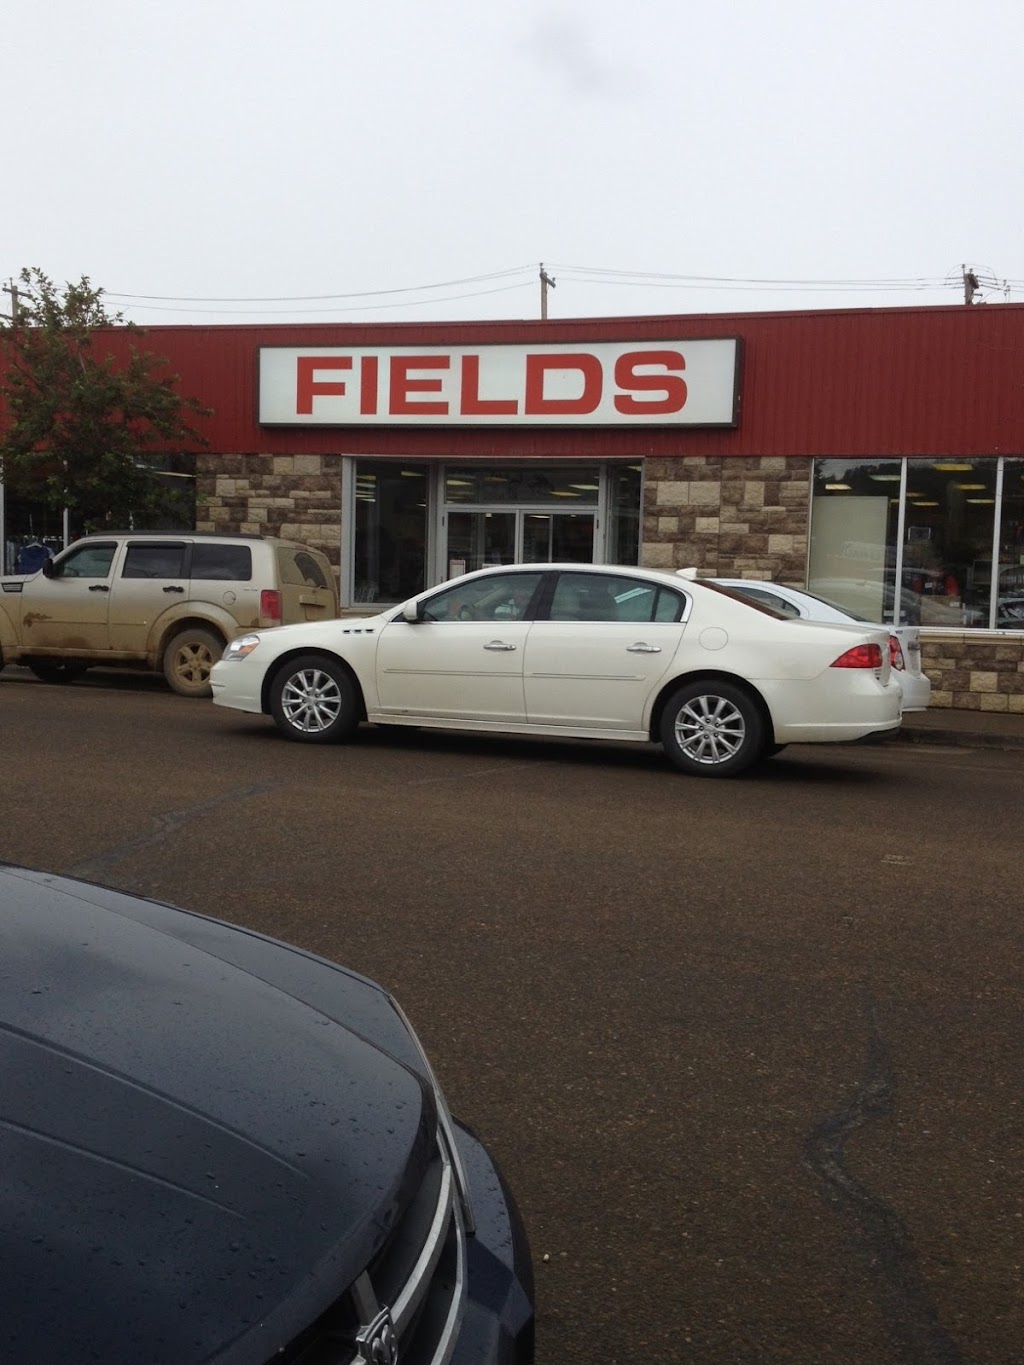 FIELDS Athabasca | 4919 49 St, Athabasca, AB T9S 1C5, Canada | Phone: (780) 675-4244